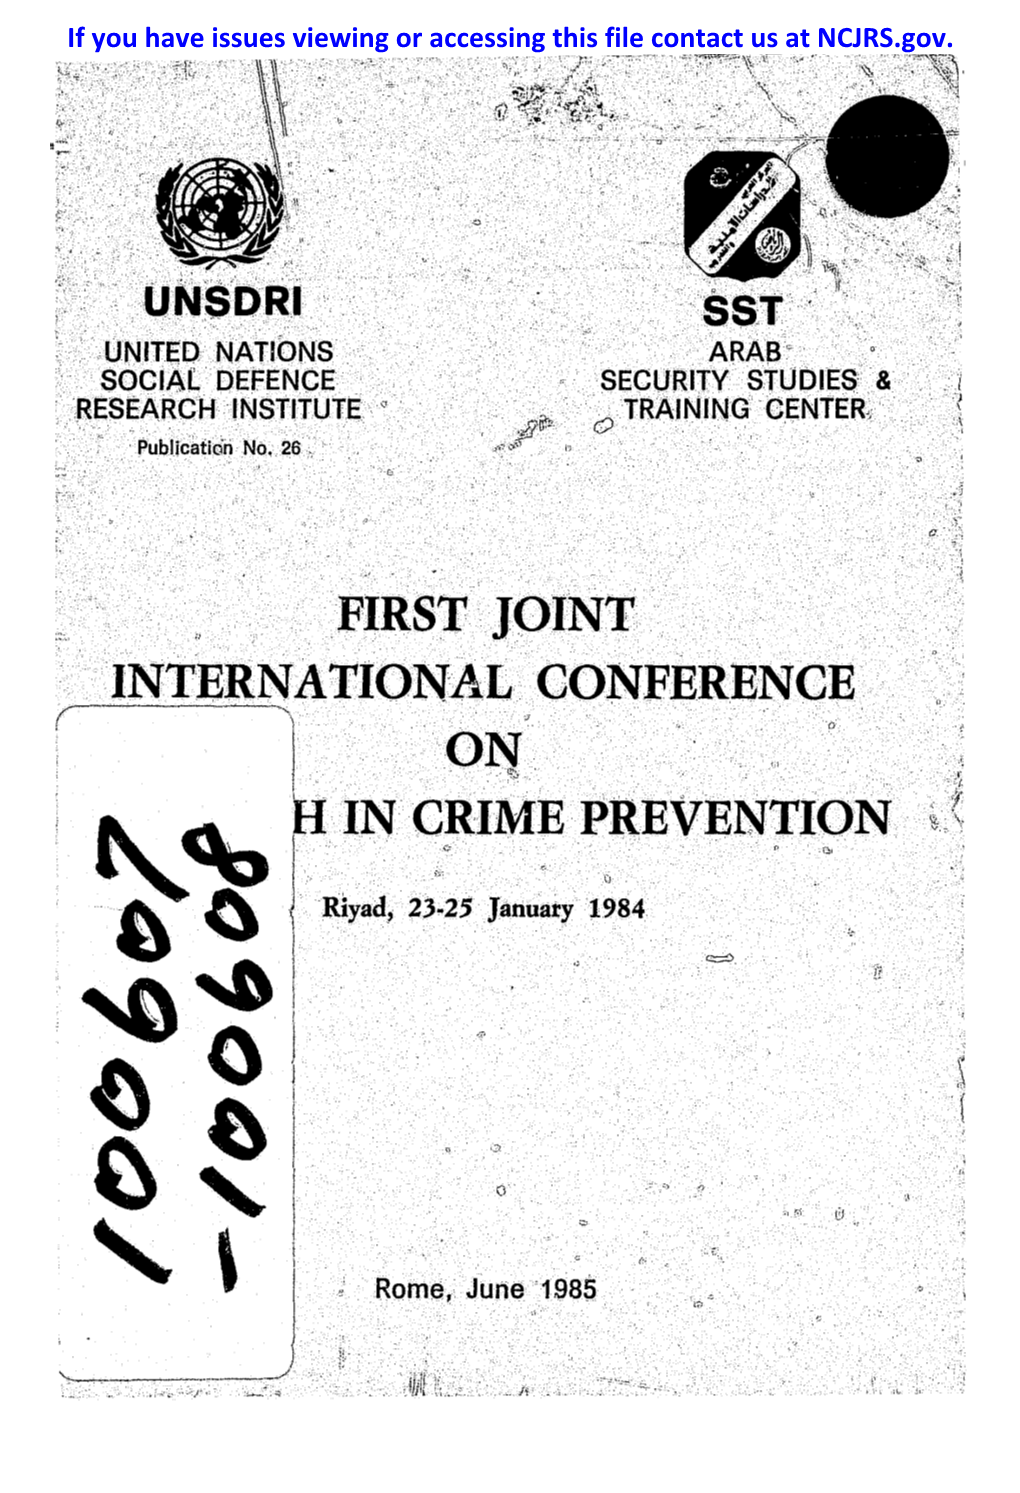 First Joint International Conference on Research in Crime Prevention